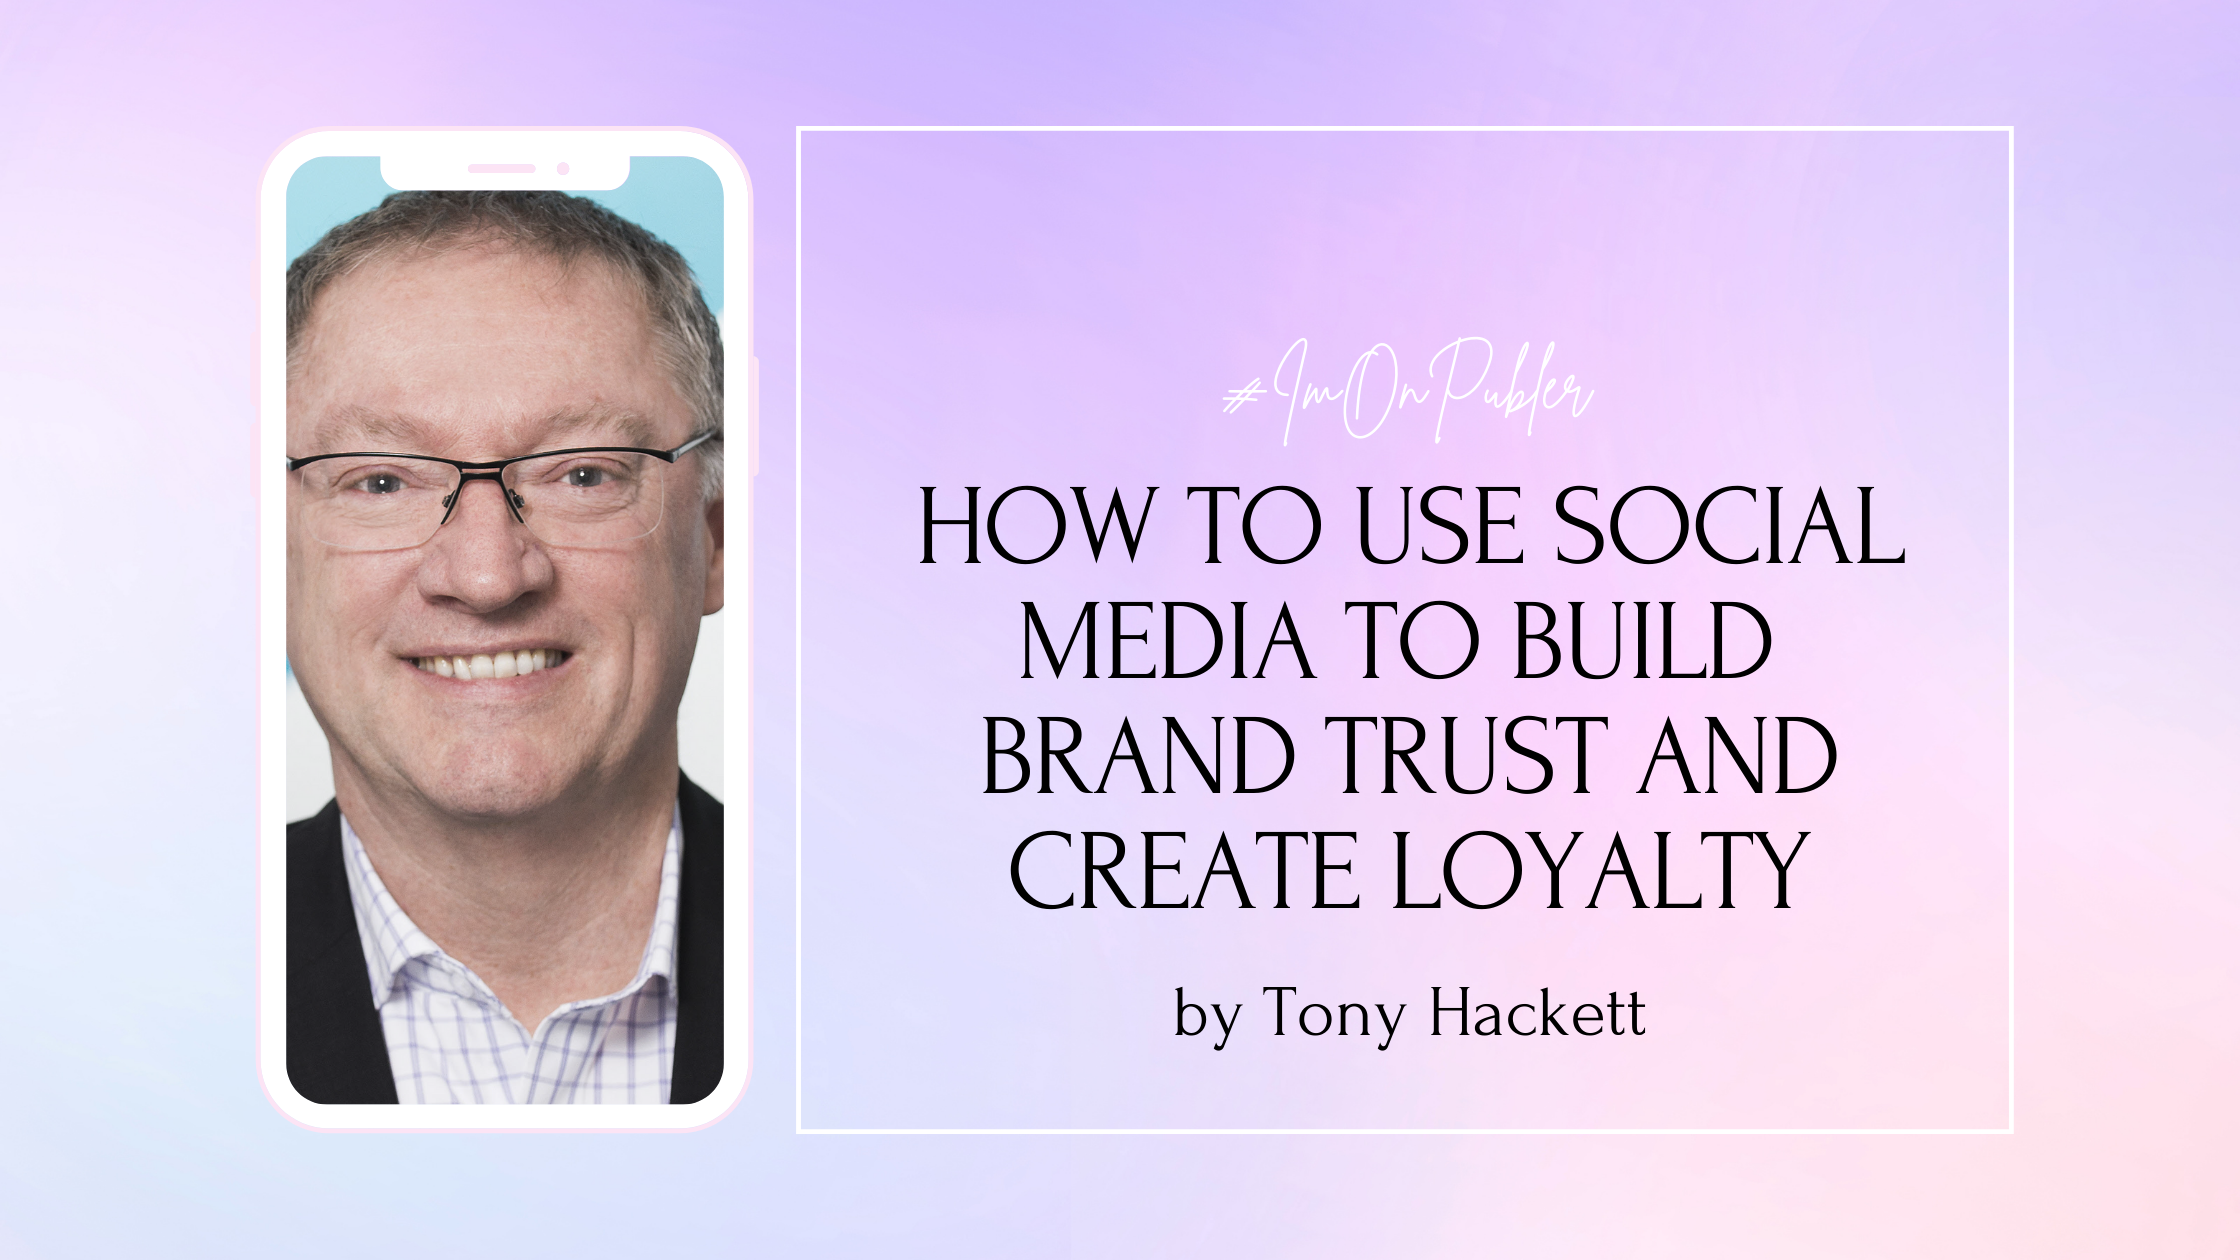 How to Use Social Media to Build Brand Trust and Create Loyalty by Tony Hackett